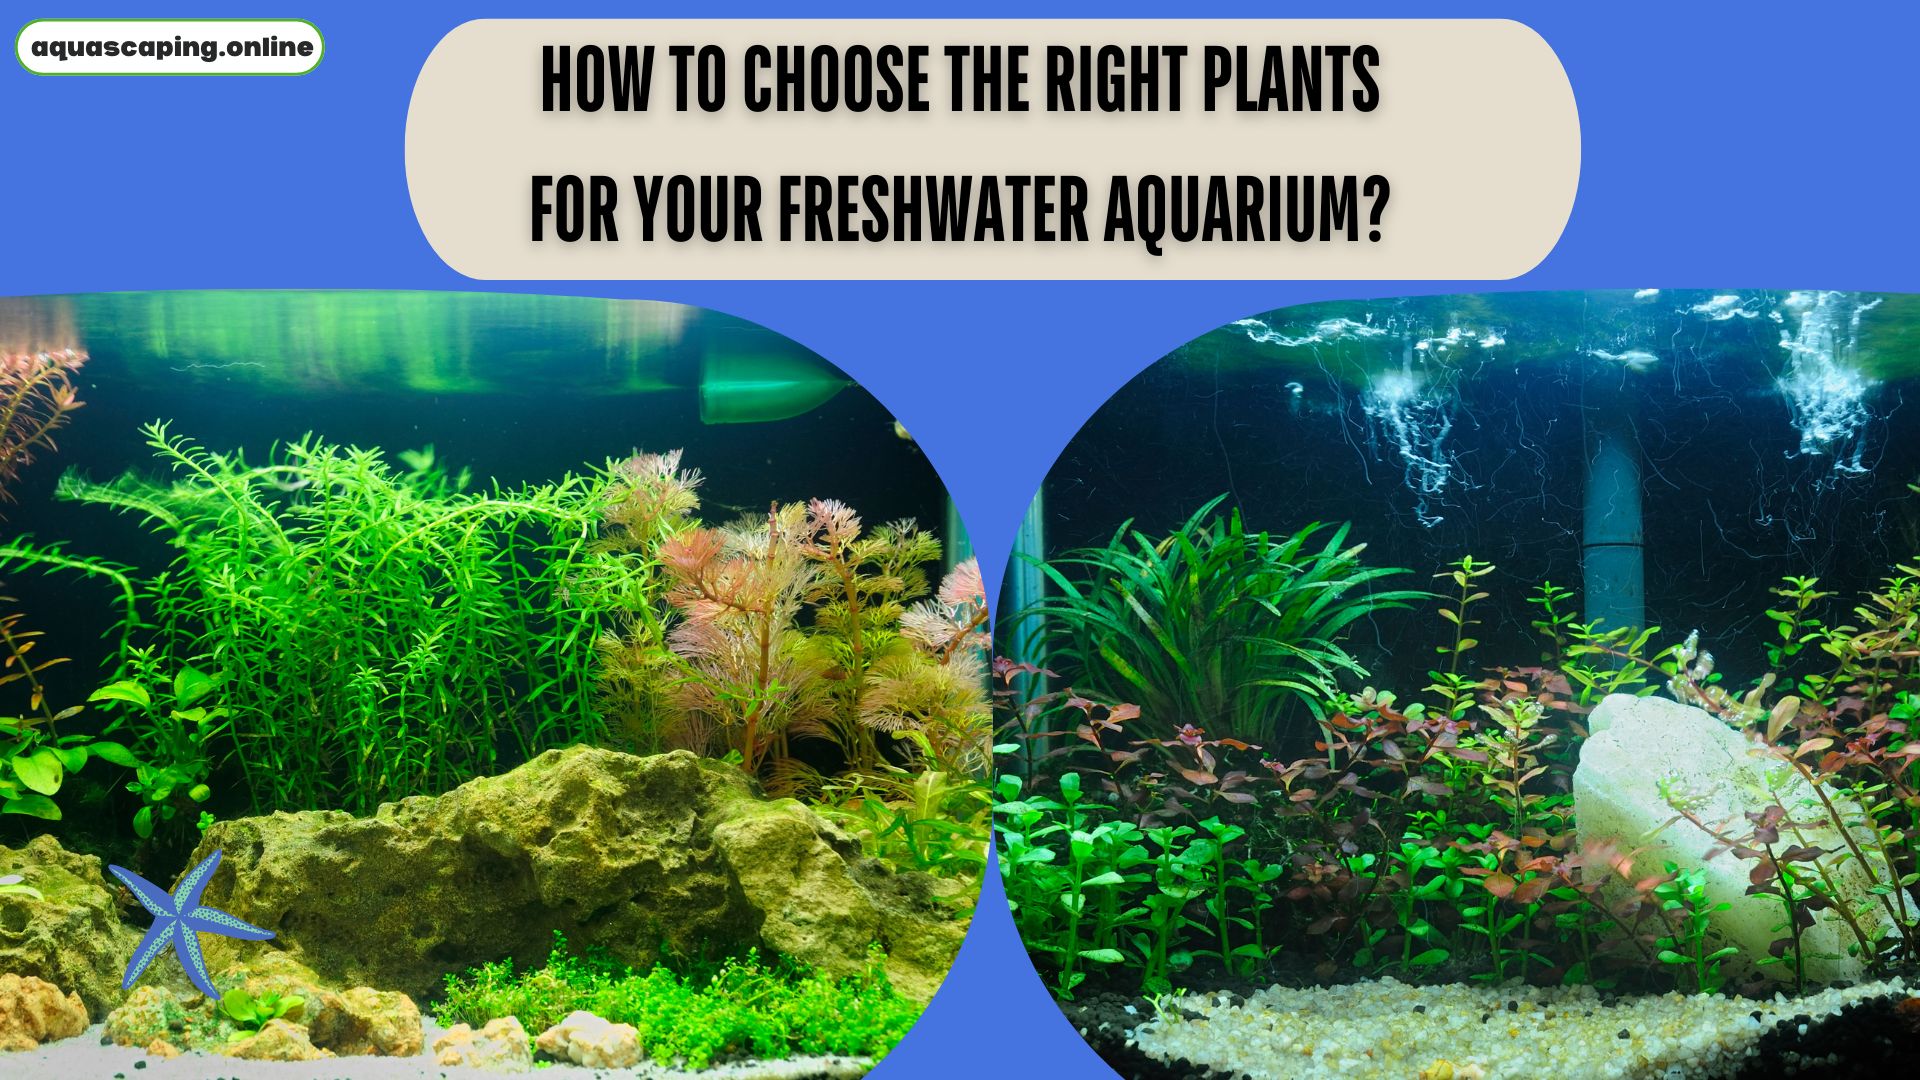 Right plants for your freshwater aquarium